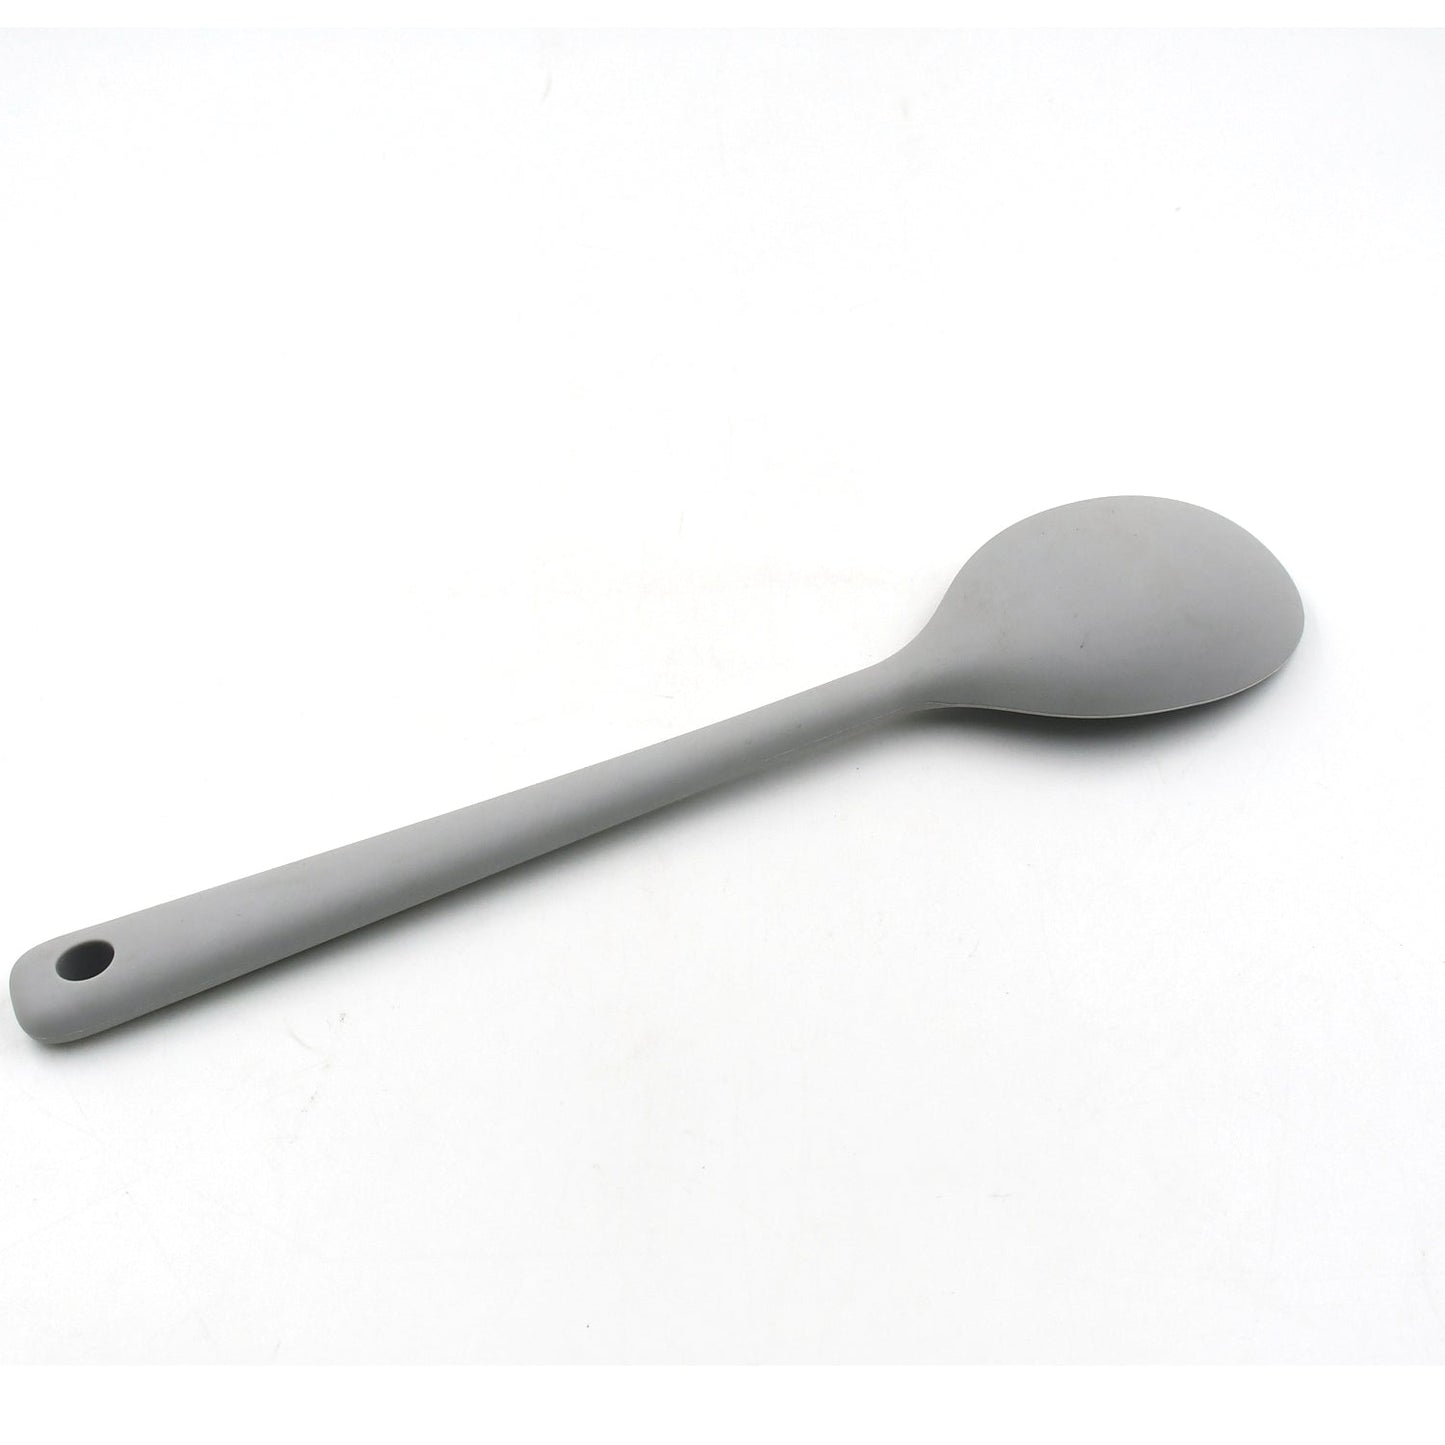 Silicone Spoons for Cooking - Large Heat Resistant Kitchen Spoons (32cm)